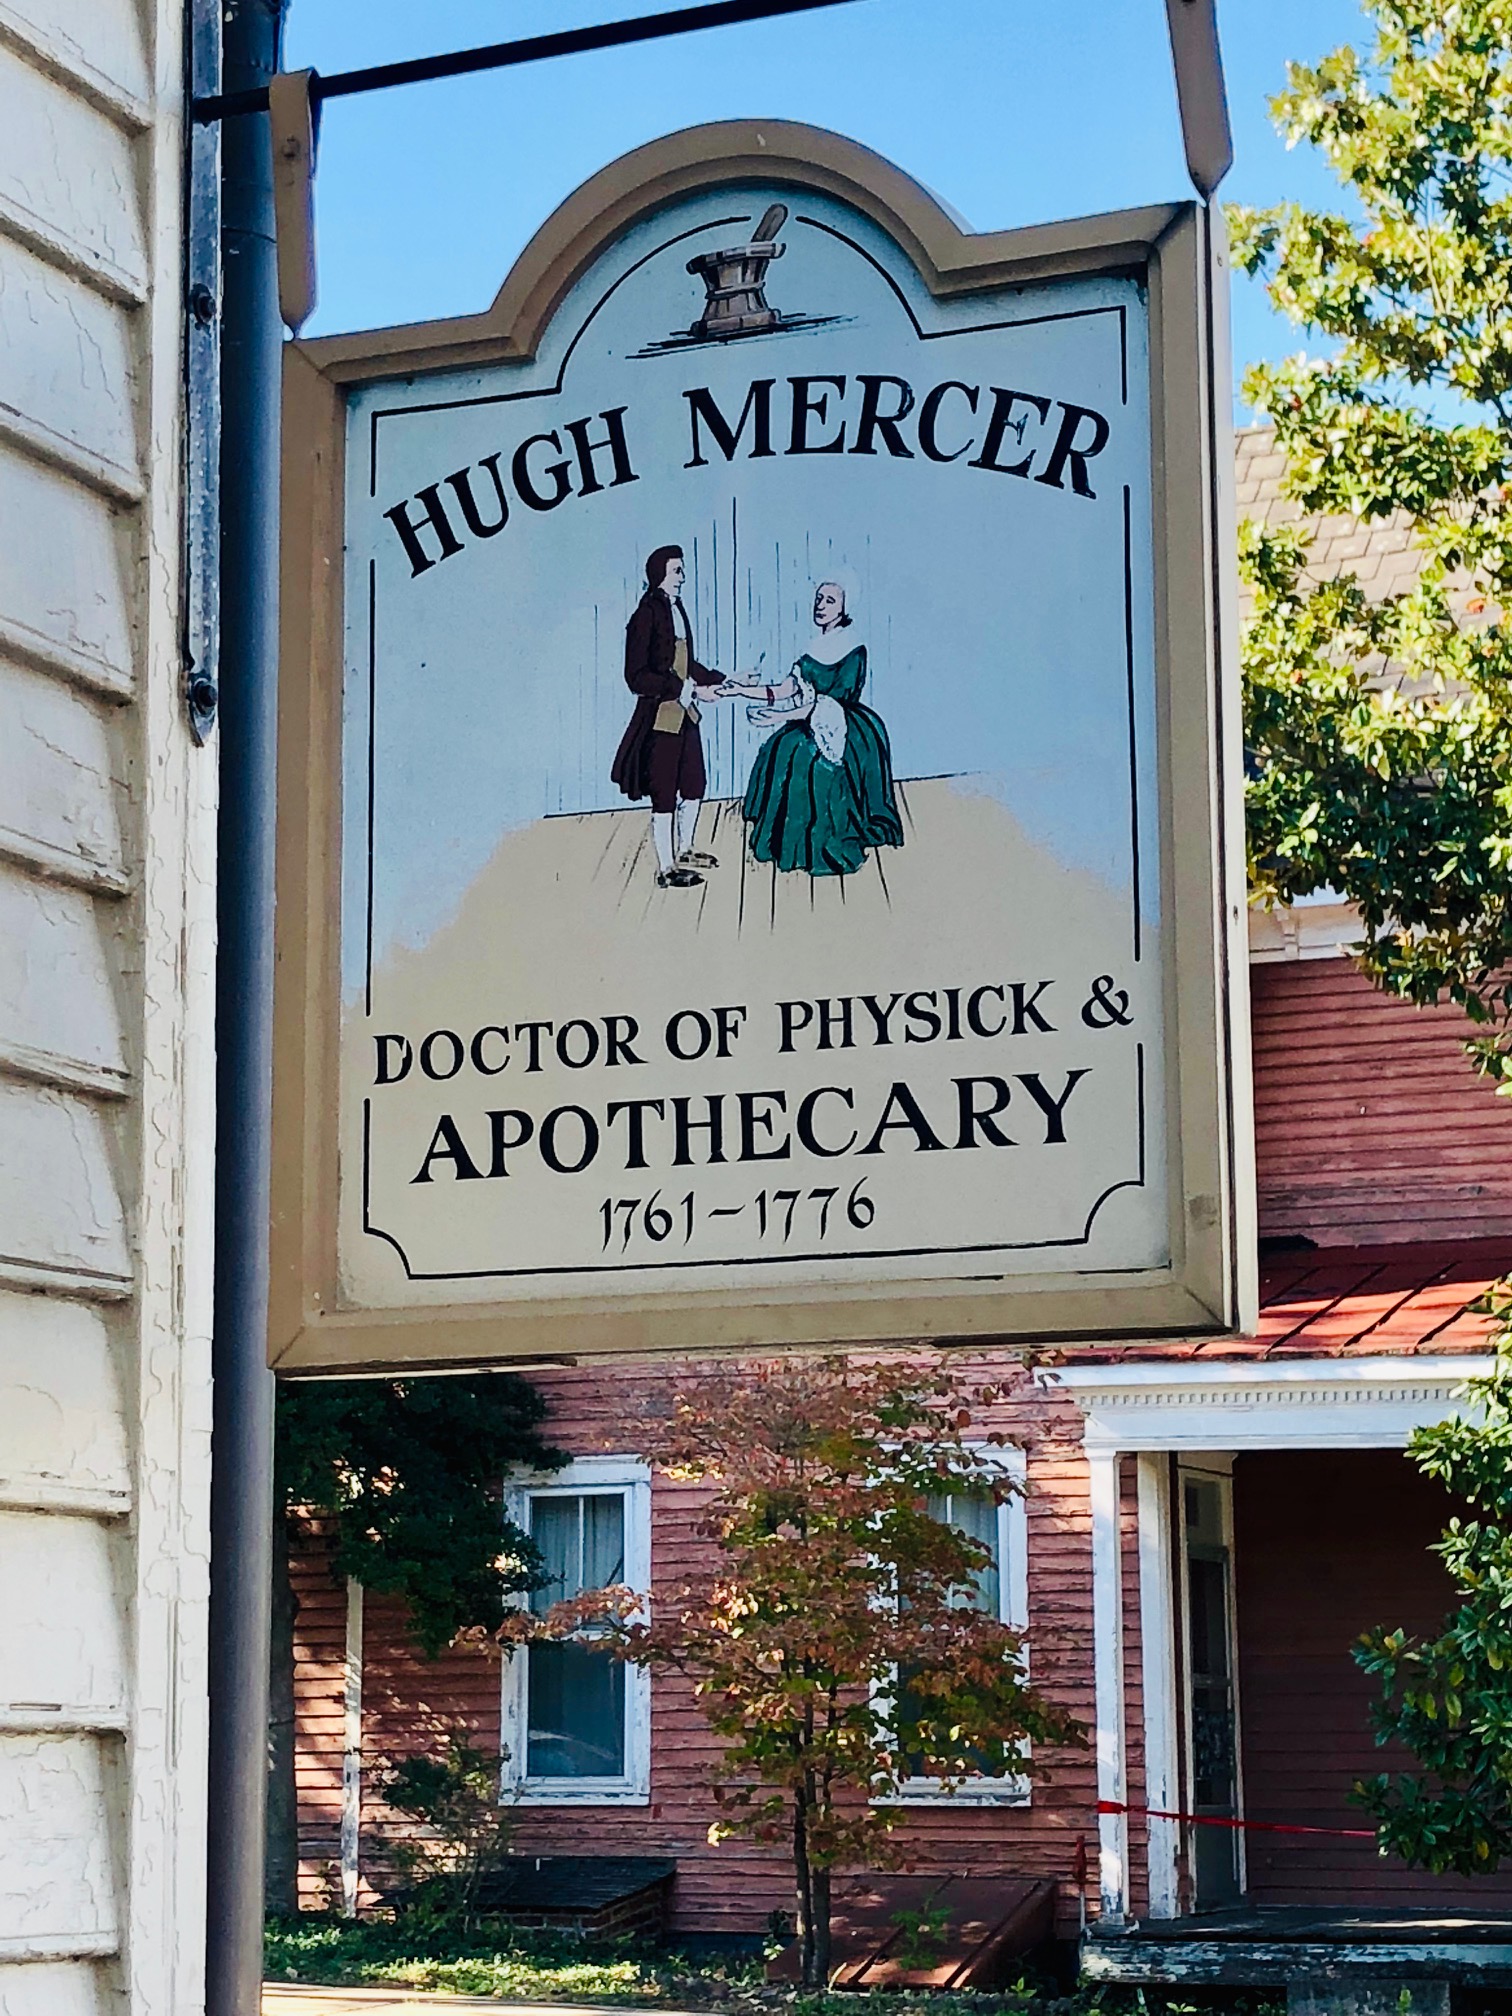 Dr. Hugh Mercer-Doctor and Apothecary